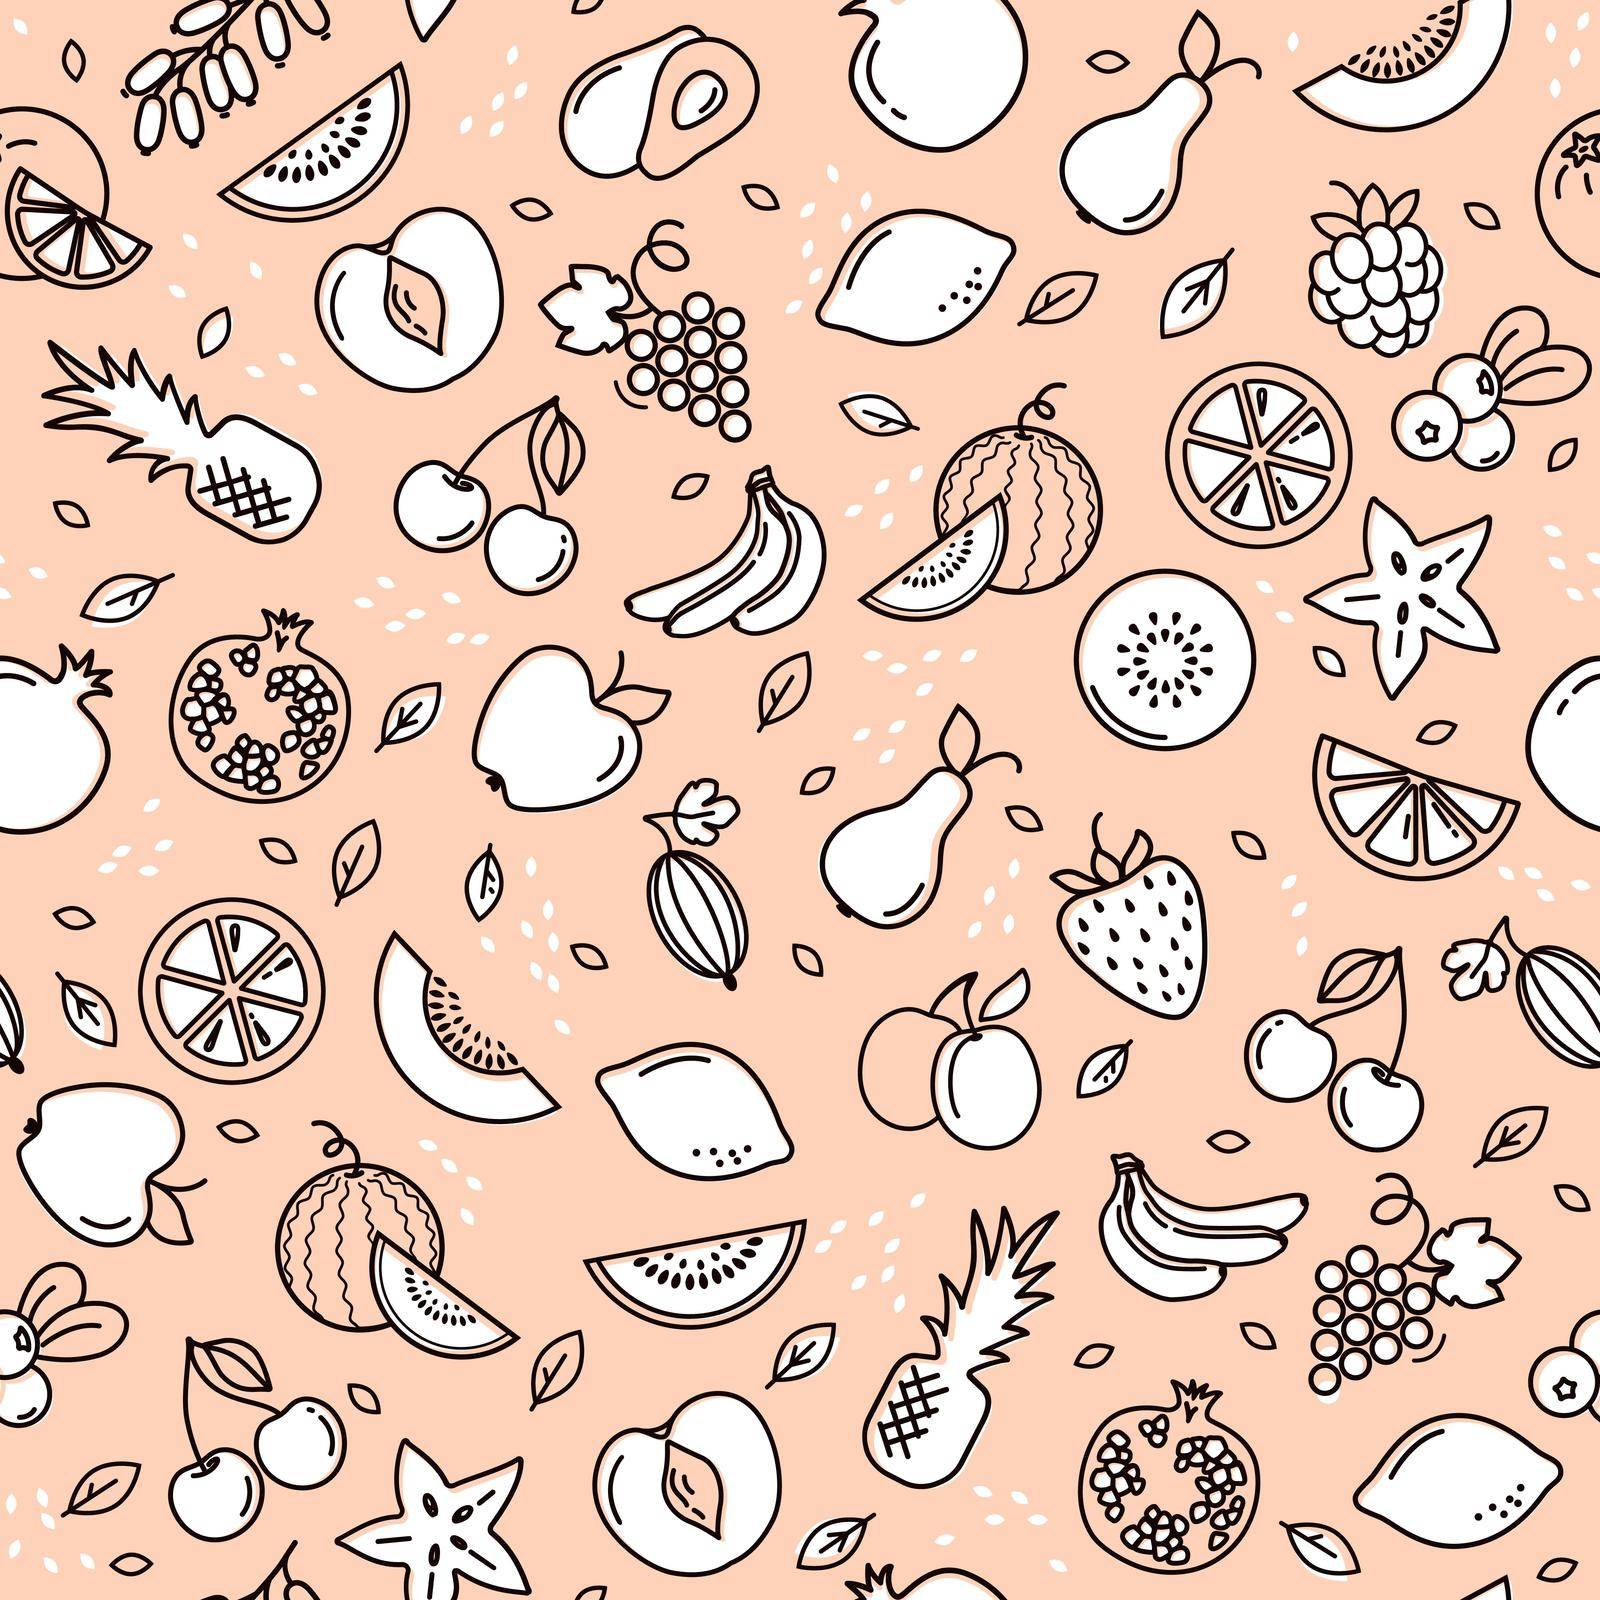 Vector set of sketches of various fruits isolated on a light background. Good background for textiles and print. Vector illustration